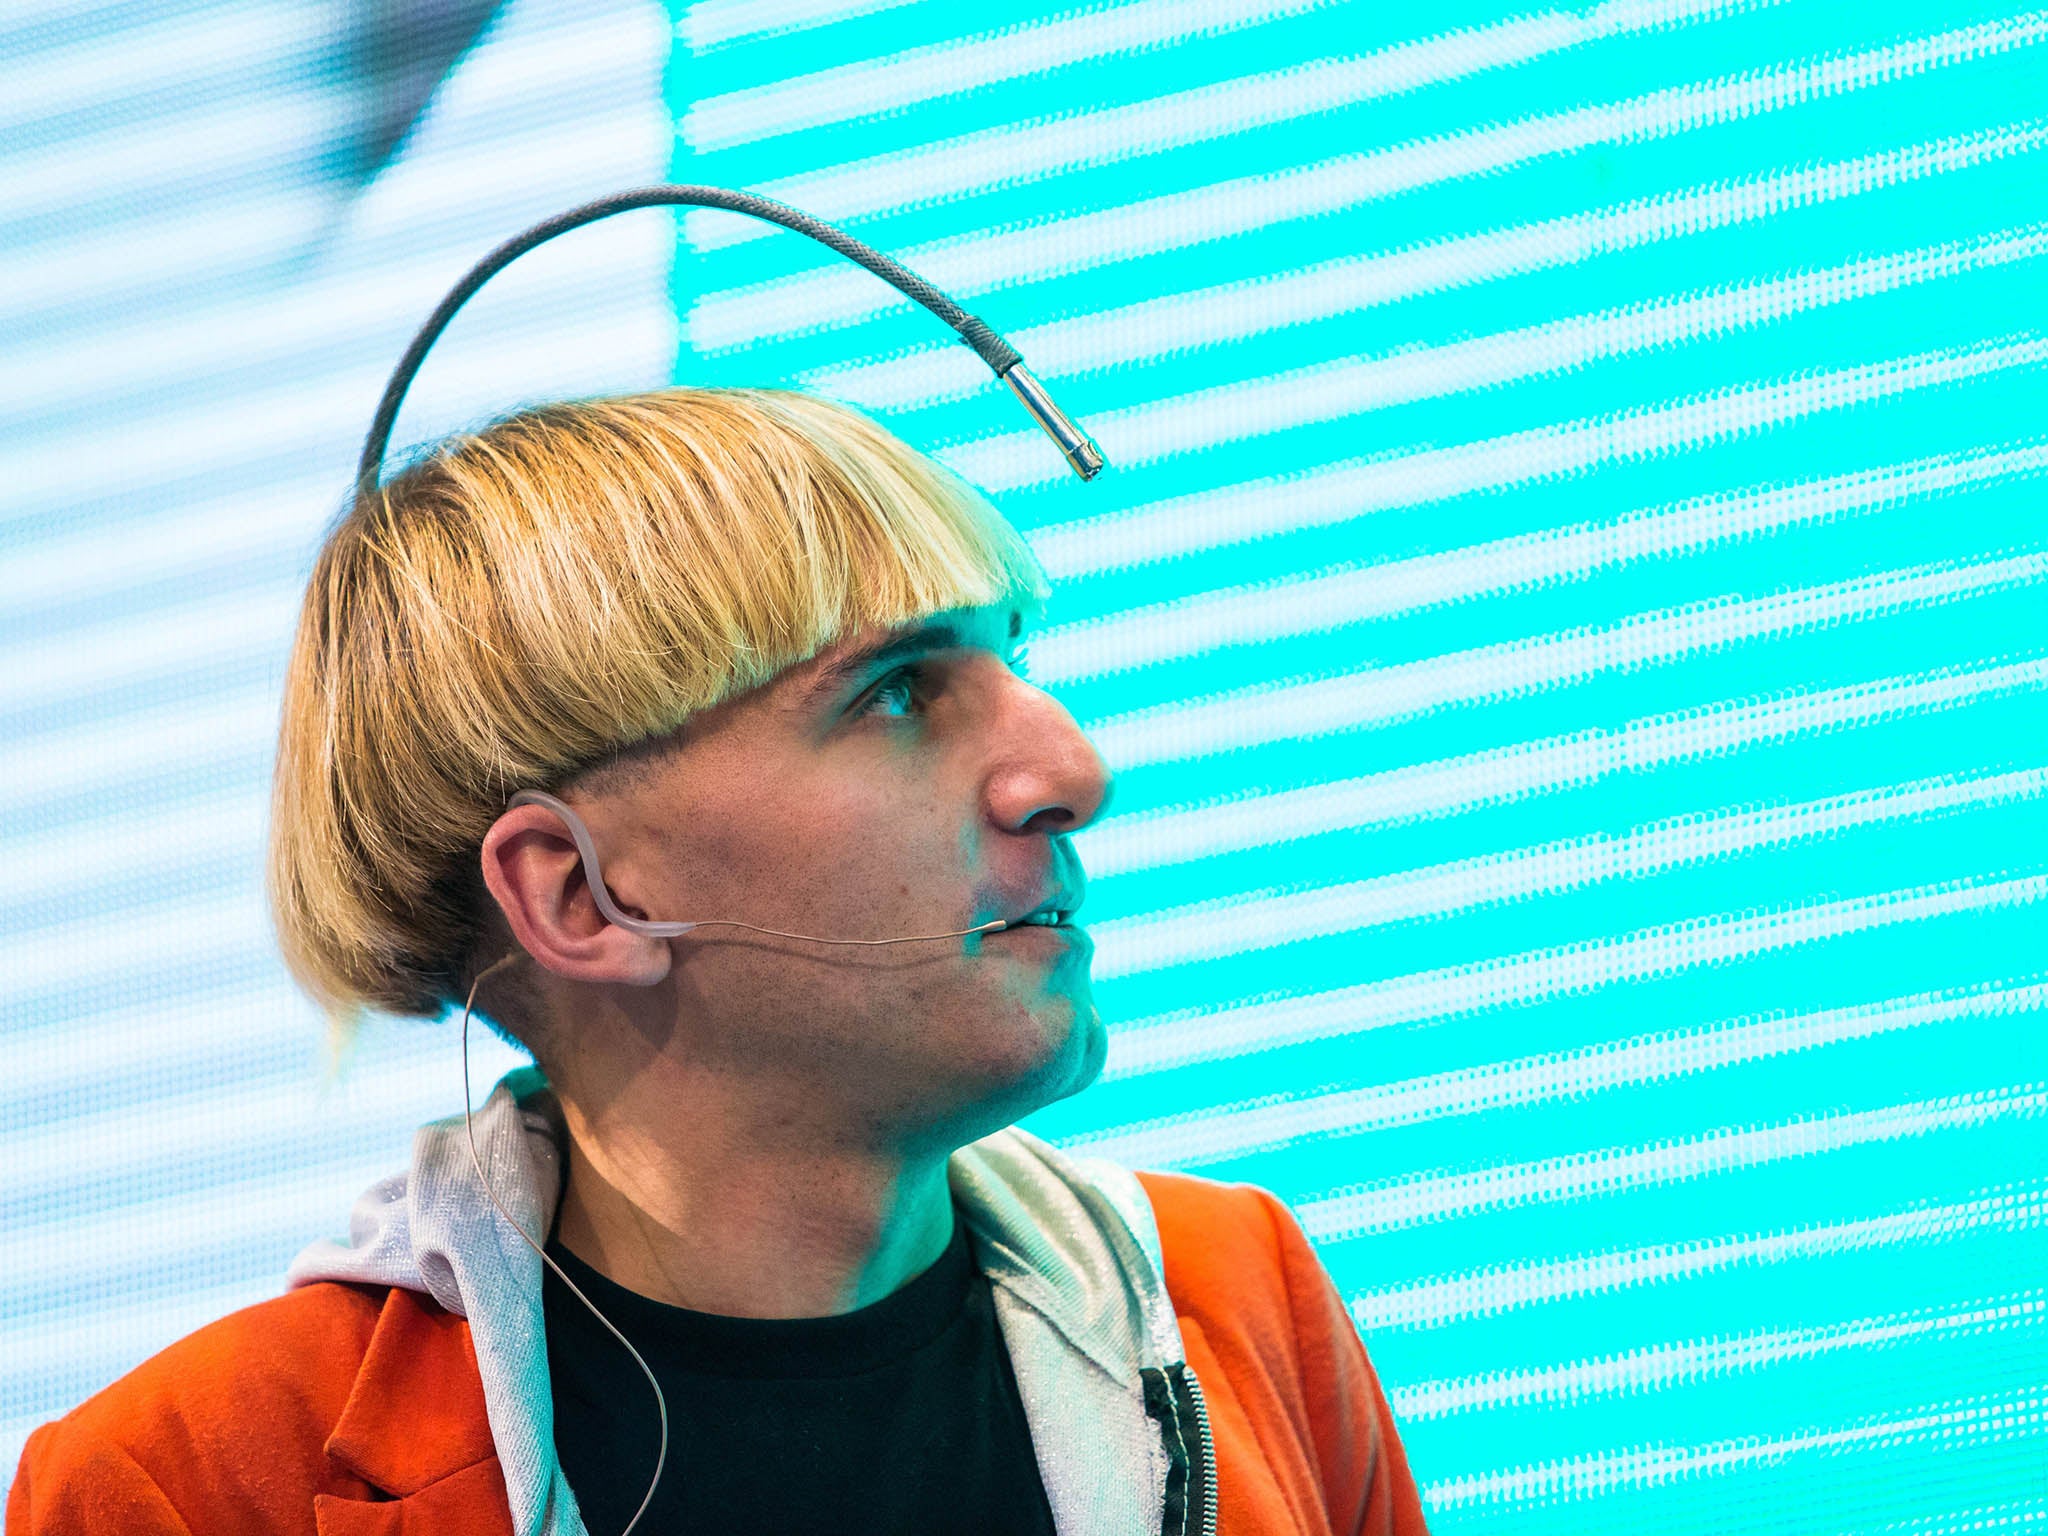 Are we are the messed-up, conflicted product of asynchronous development? Northern Ireland-born contemporary artist 'Cyborg' Neil Harbisson presents his lecture 'hear colors'